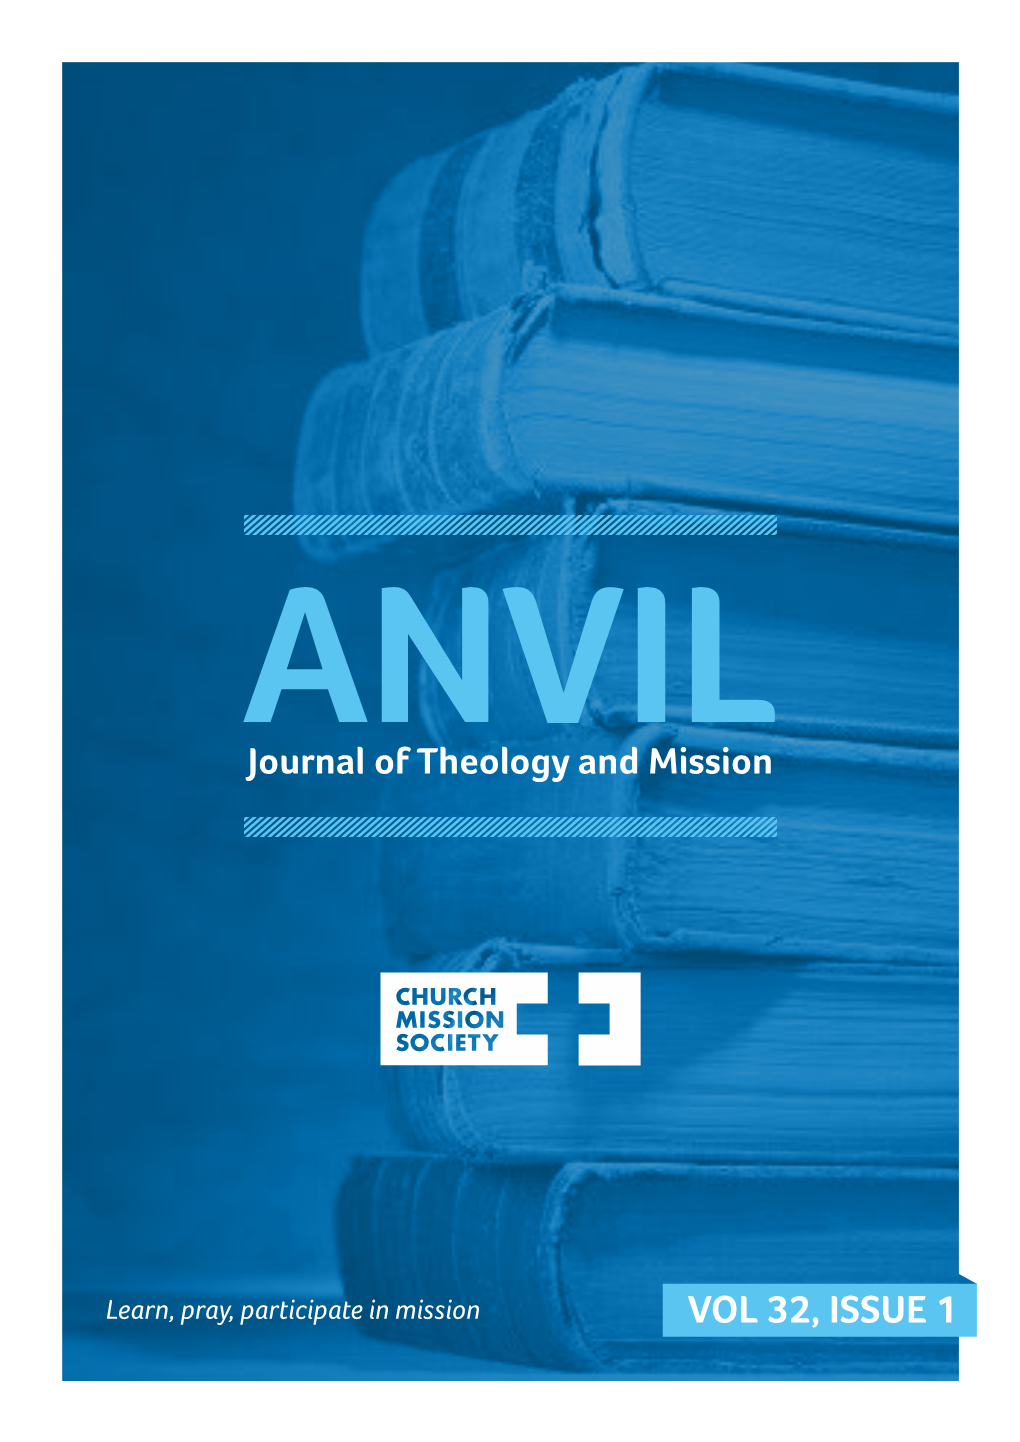 Vol 32, Issue 1 Welcome to Our First Online Edition of Anvil